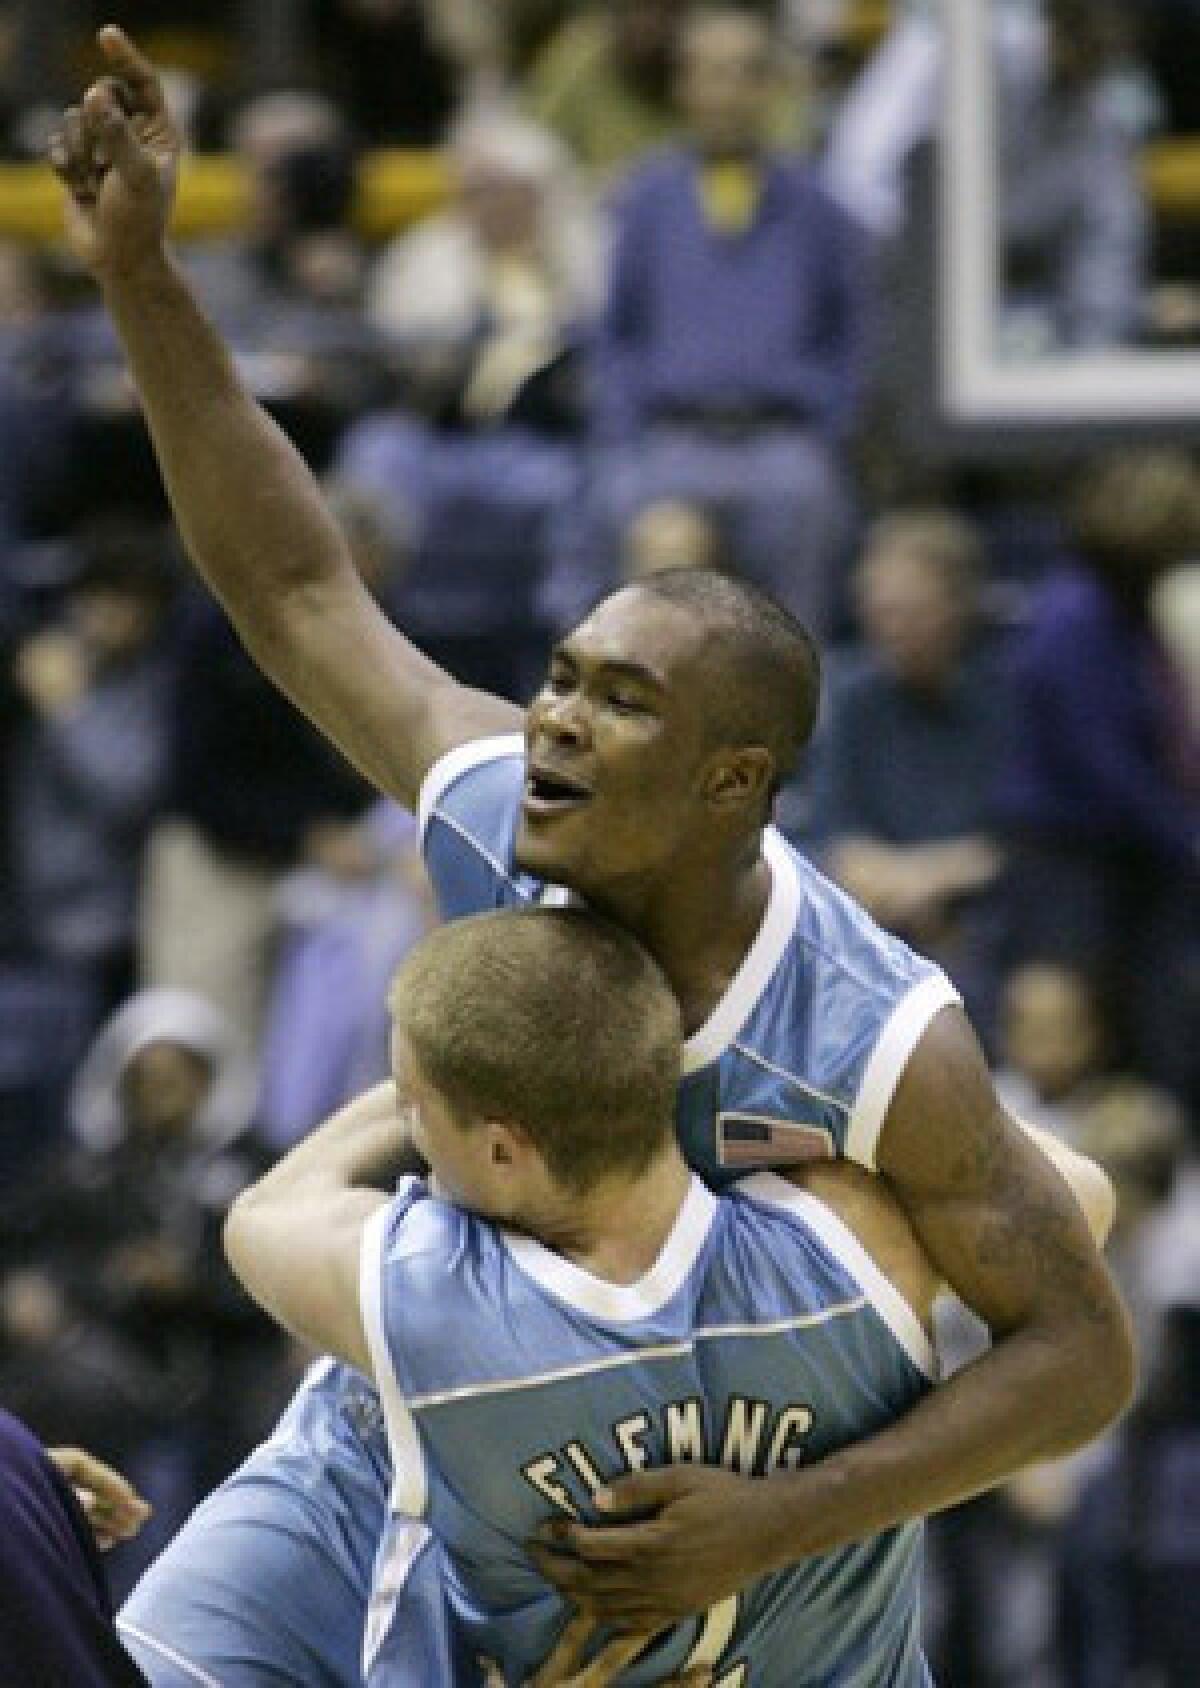 University of San Diego basketball player Brandon Johnson, here celebrating a victory, was caught up in a betting operation.